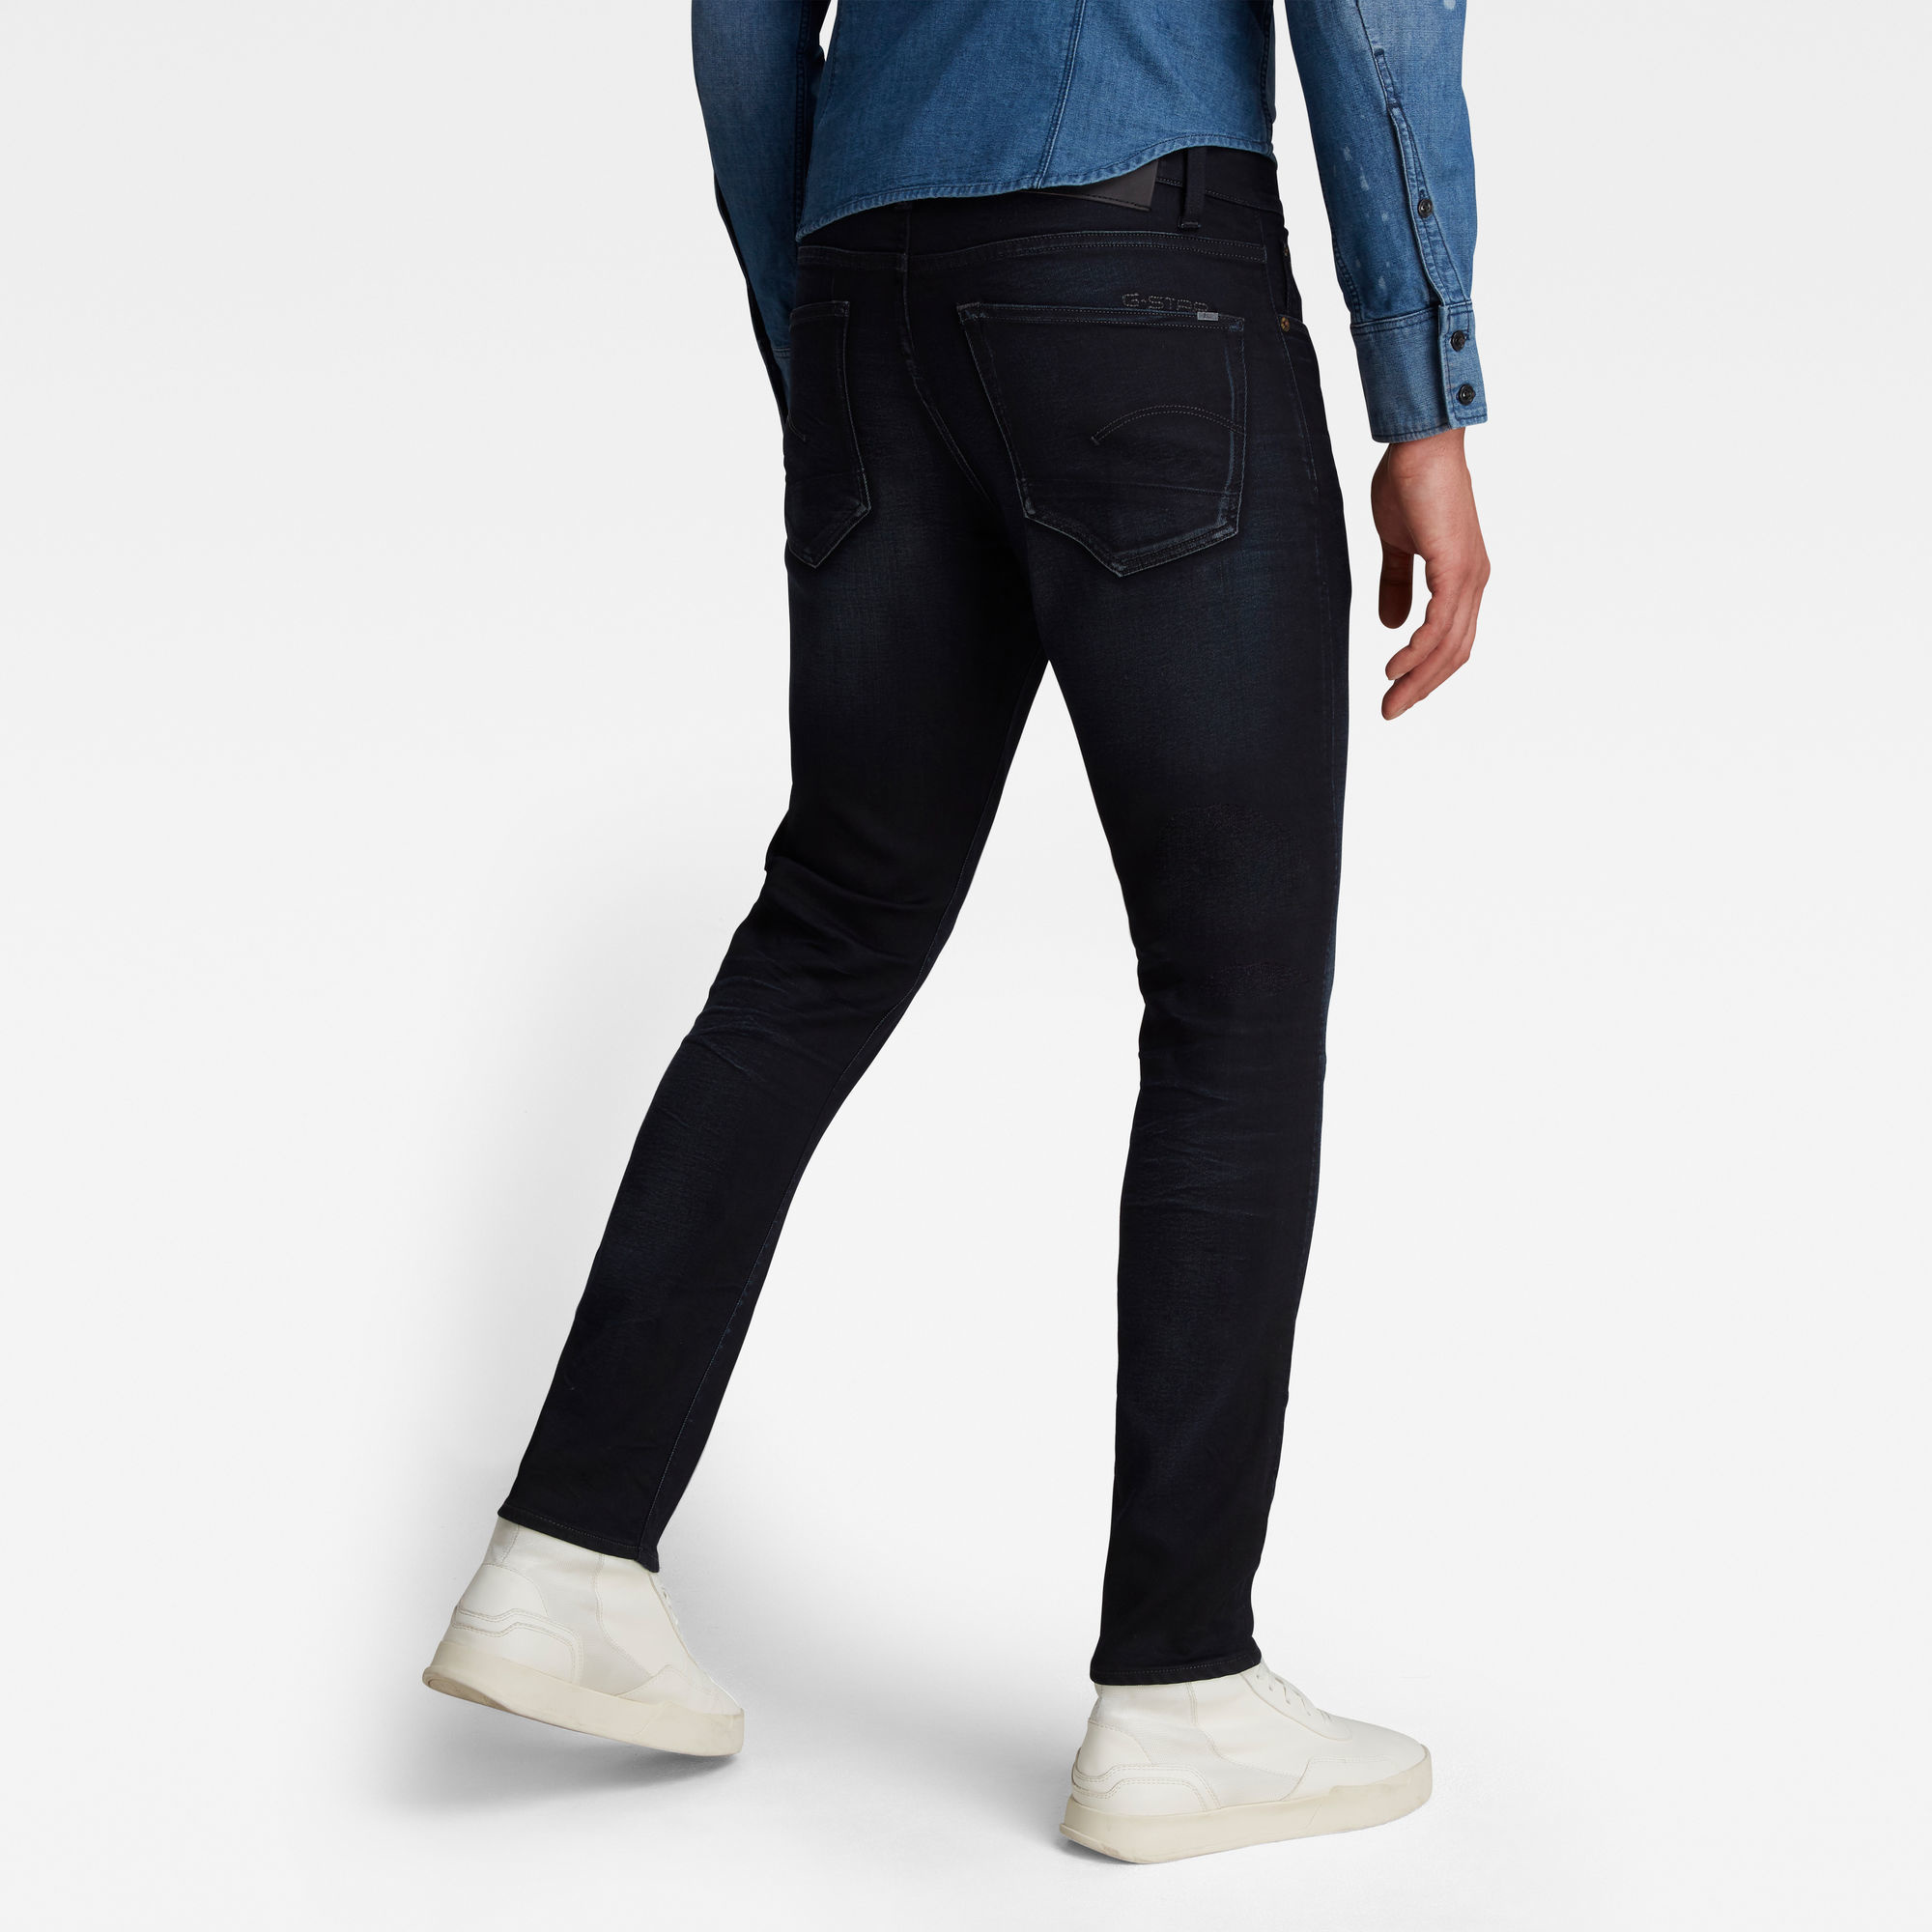 G-STAR 3301 JEANS - KING Jeans & Casuals